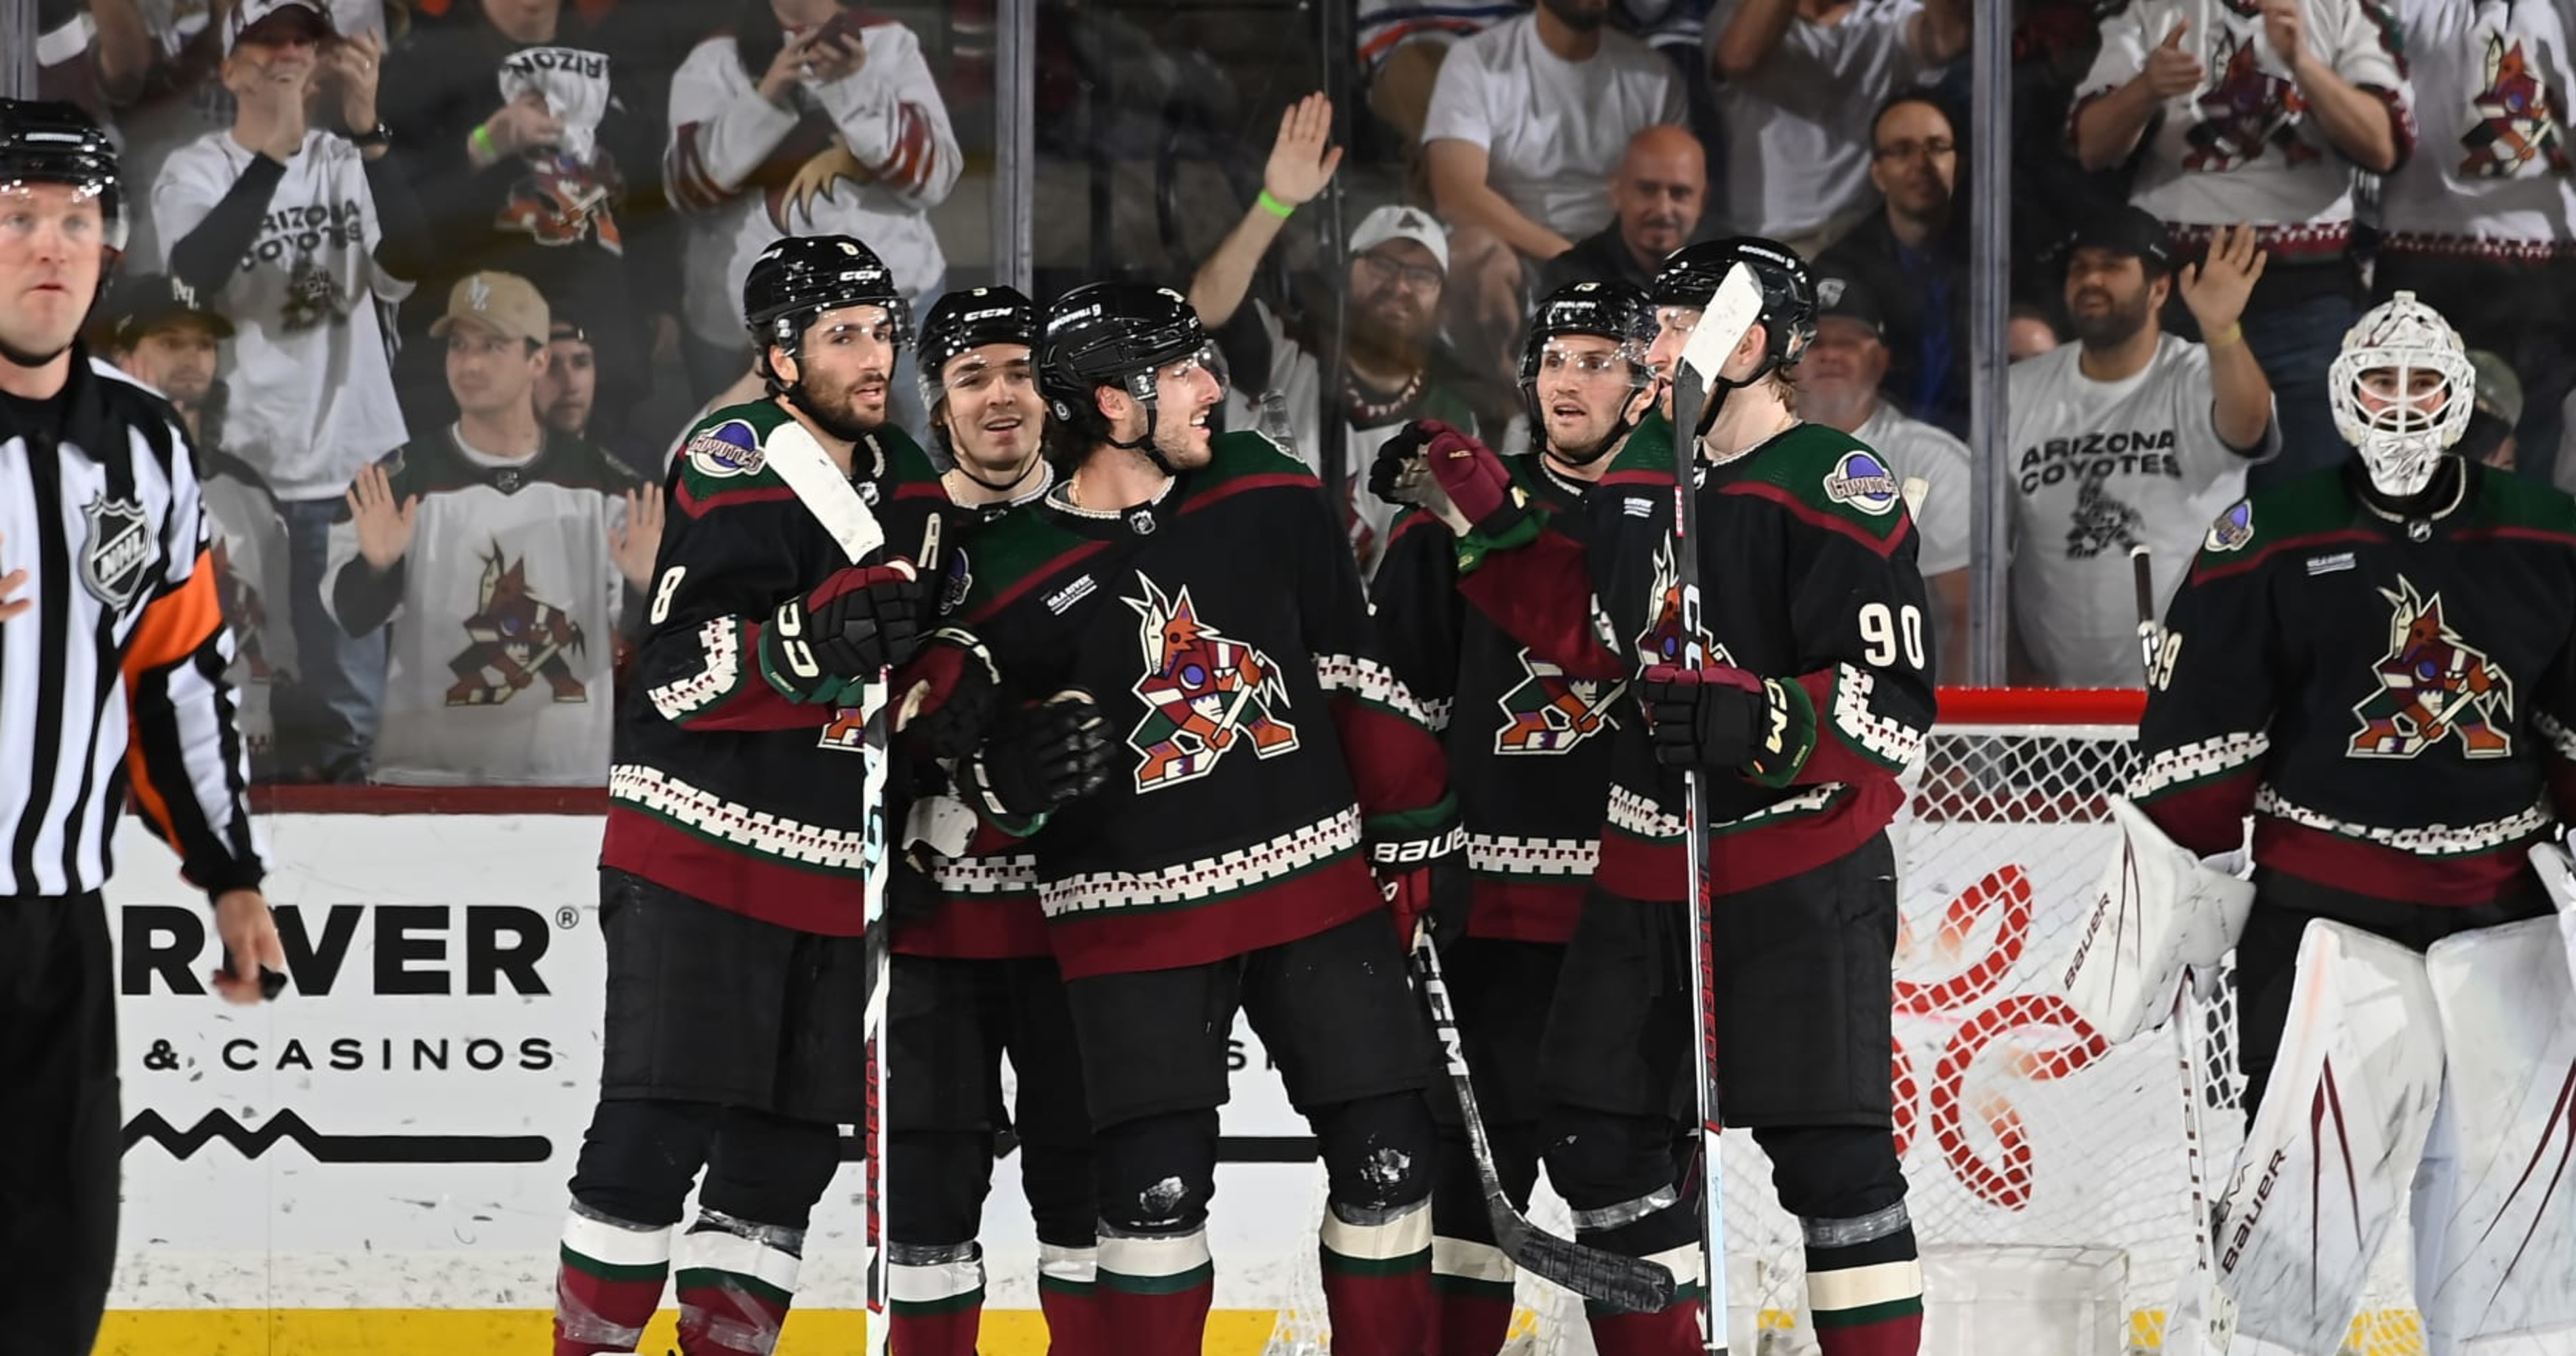 Video: Coyotes Players, Employees Salute Fans Ahead of Rumored Salt Lake City Move